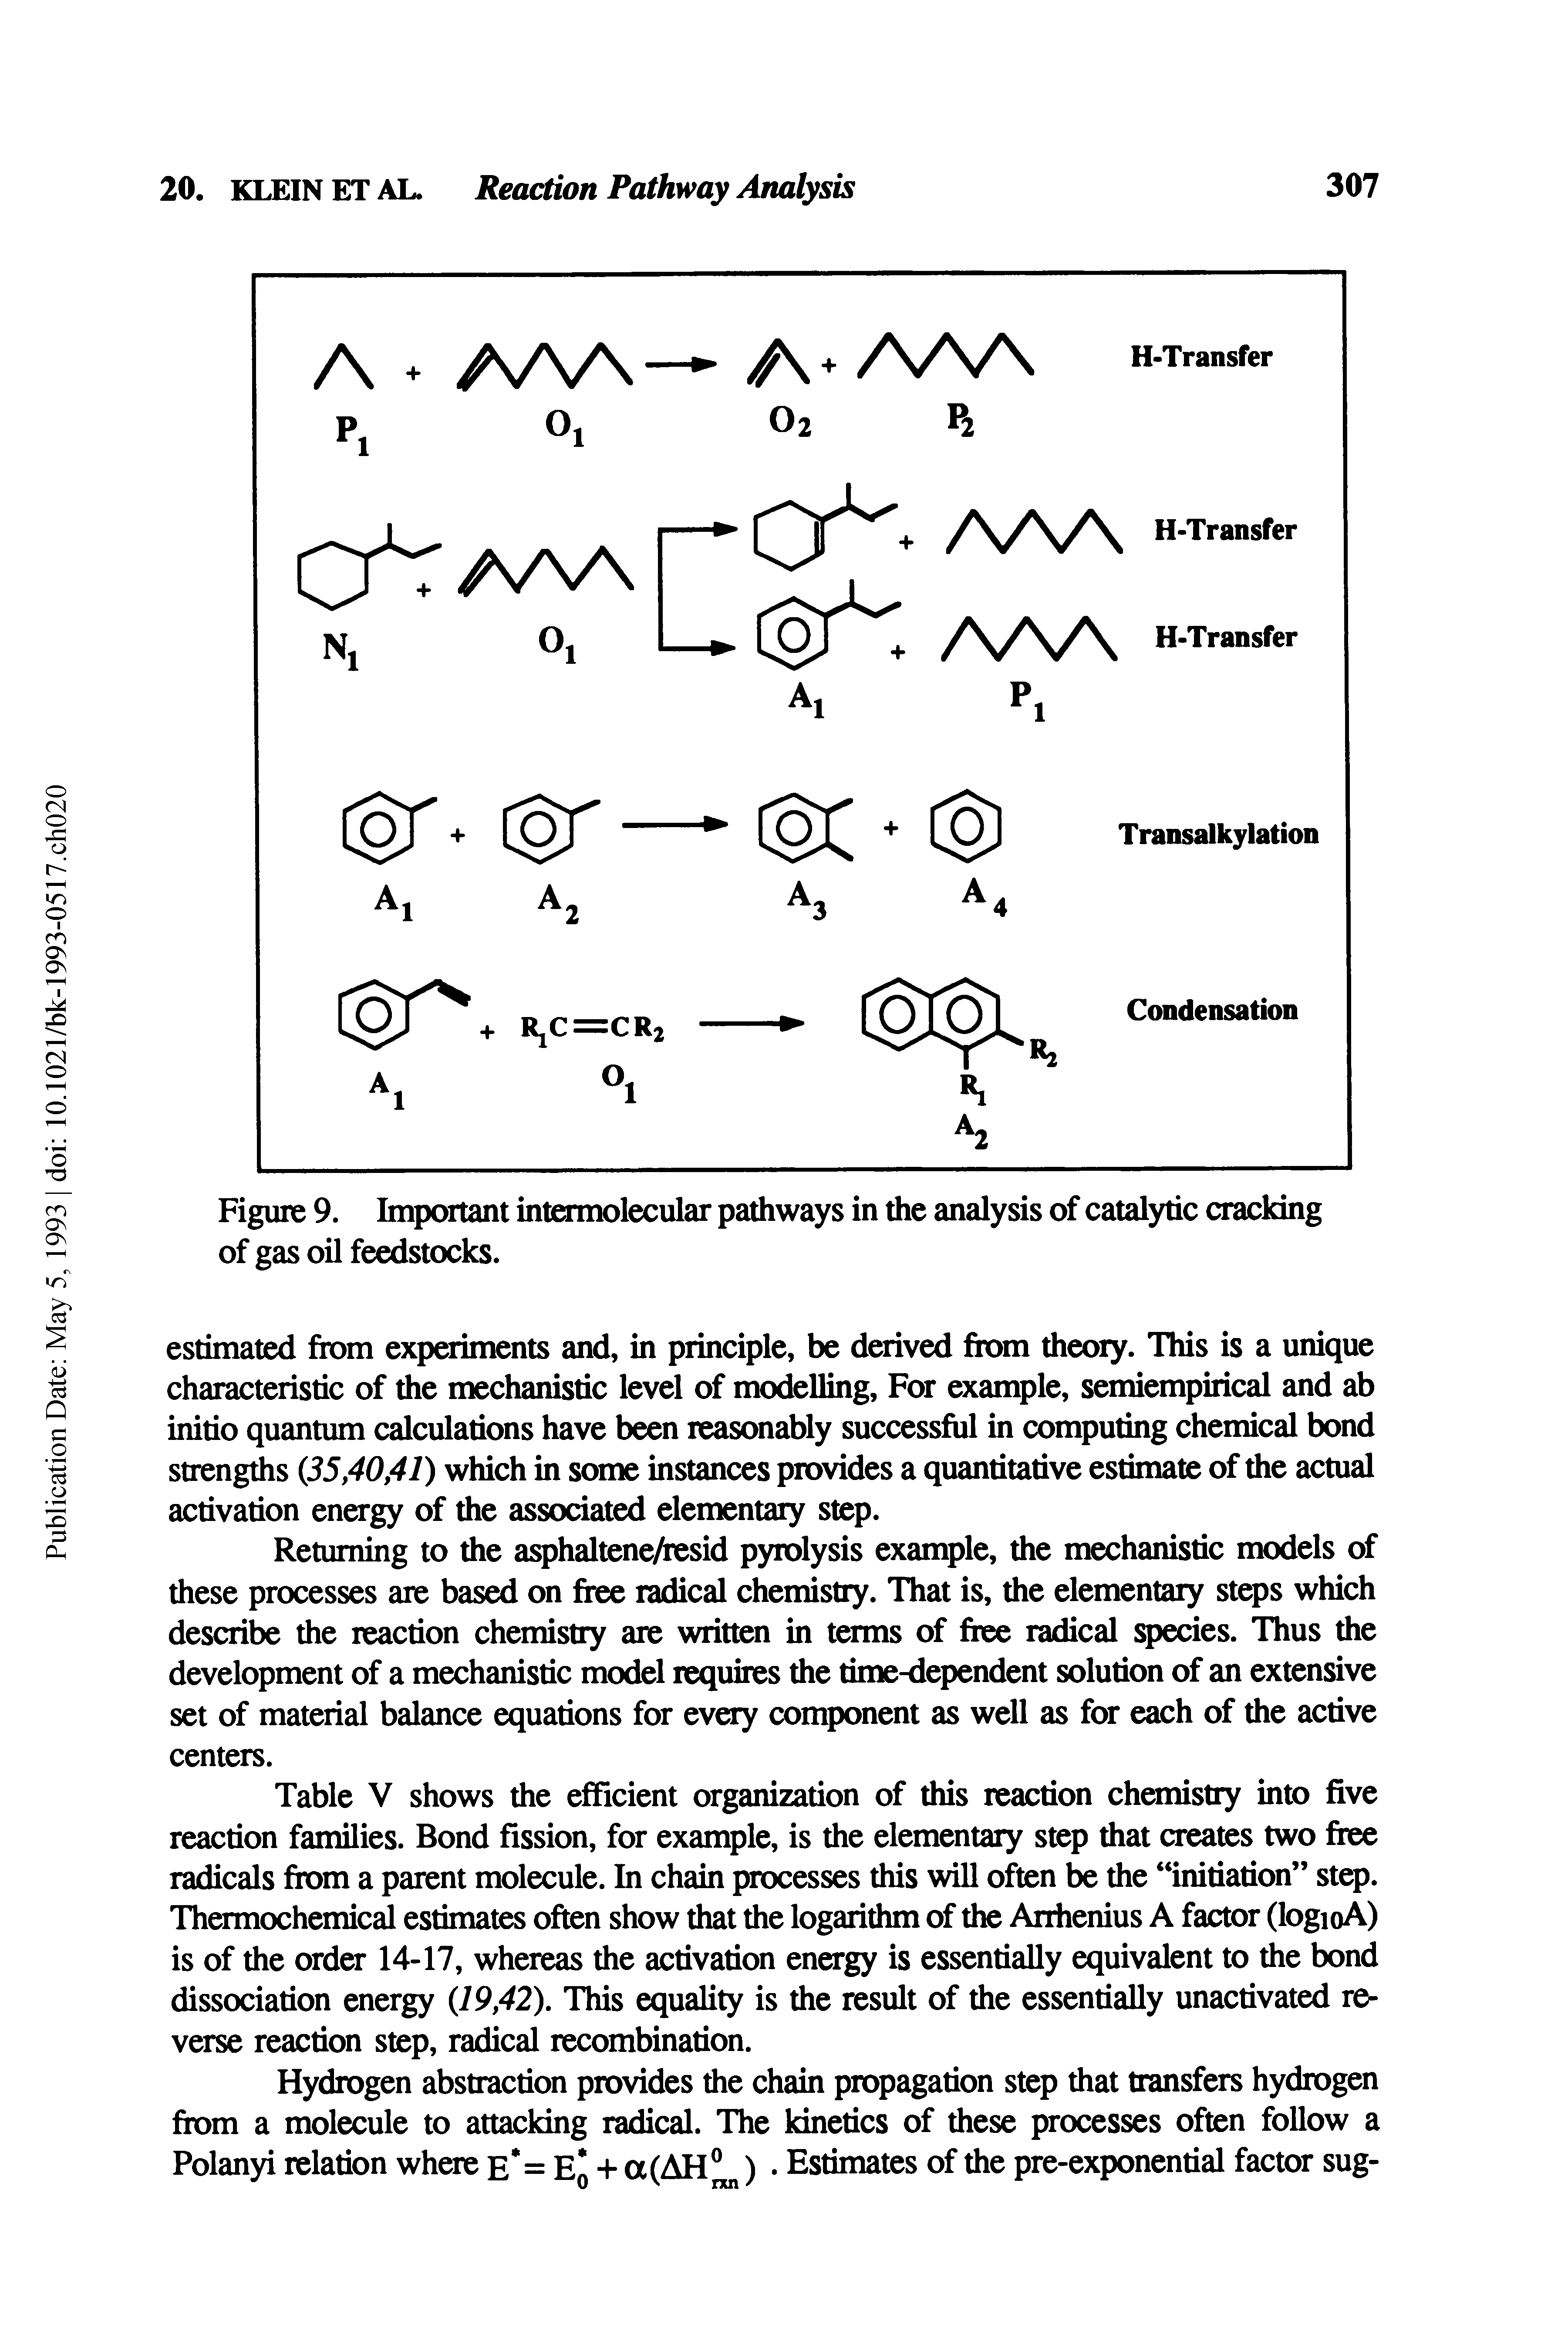 Figure 9. Important intramolecular pathways in the analysis of catalytic cracking of gas oil feedstocks.